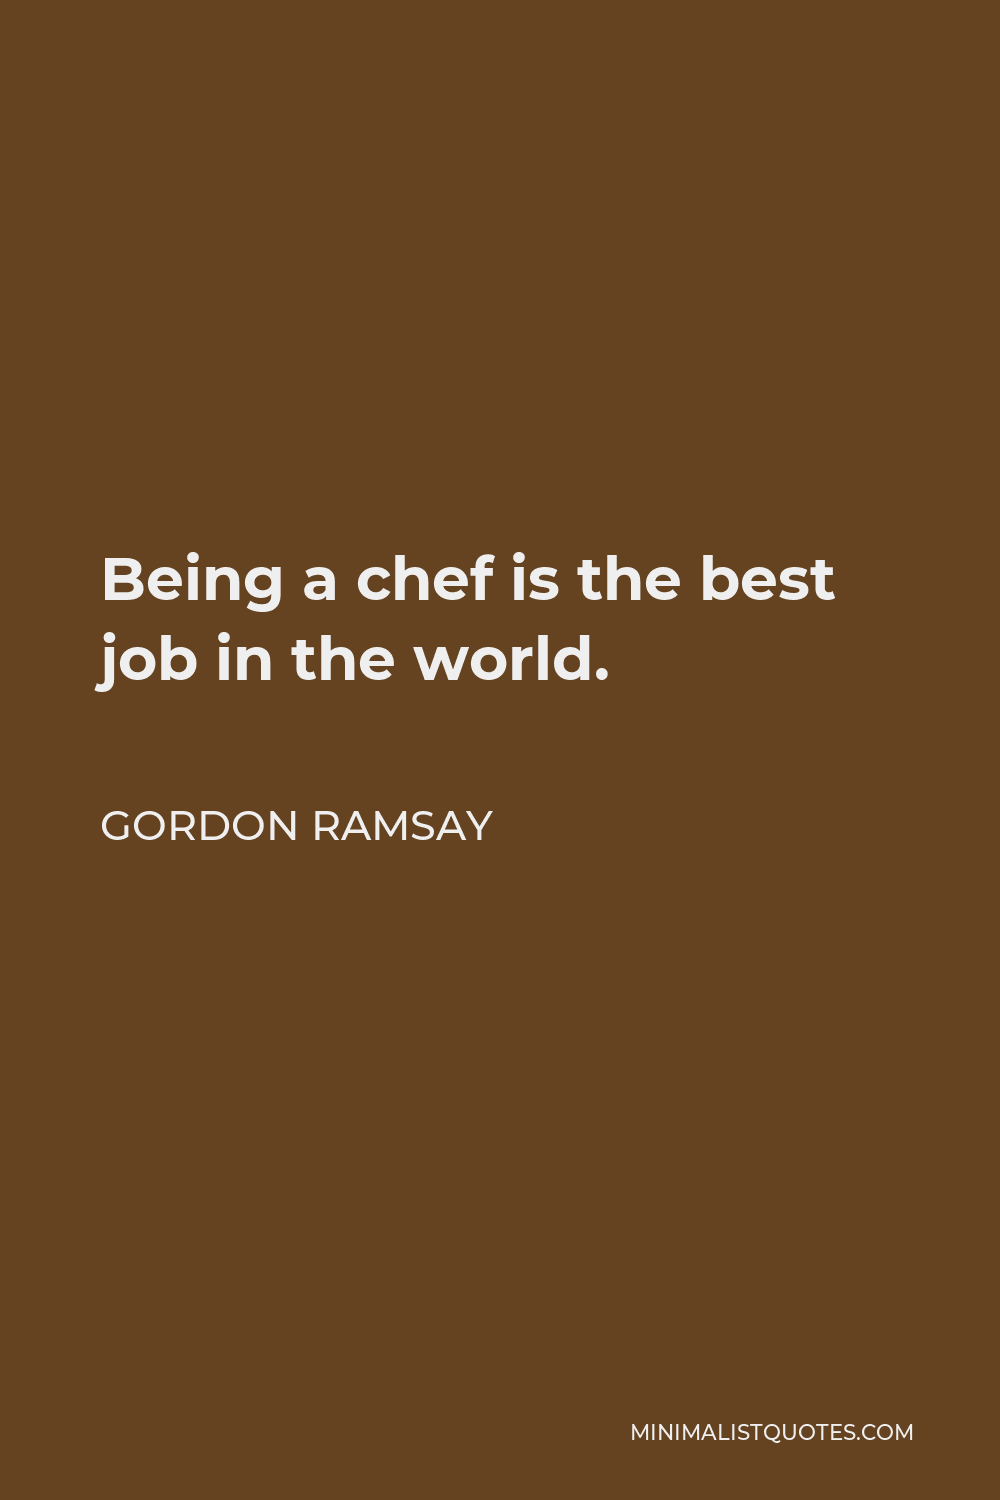 Gordon Ramsay Quote: Being a chef is the best job in the world.